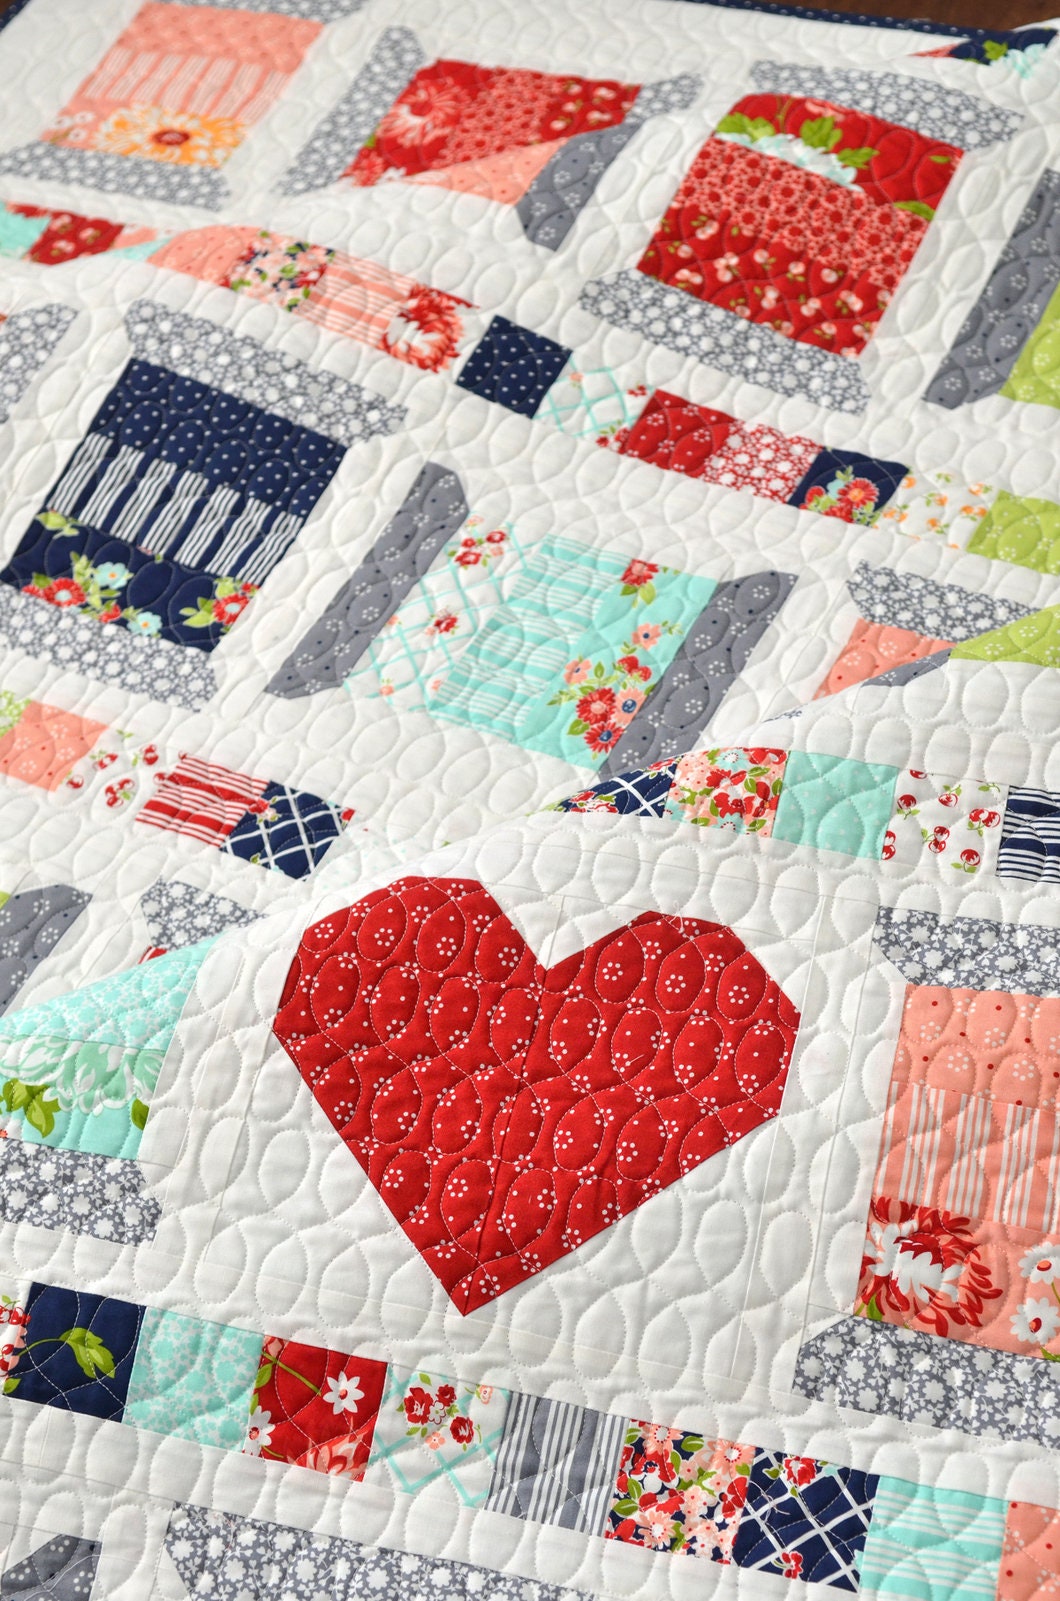 Spools 2 Quilt Pattern - Camille Roskelley for Thimble Blossoms 213, Jelly Roll Friendly Quilt Pattern - Sewing Themed Quilt Pattern